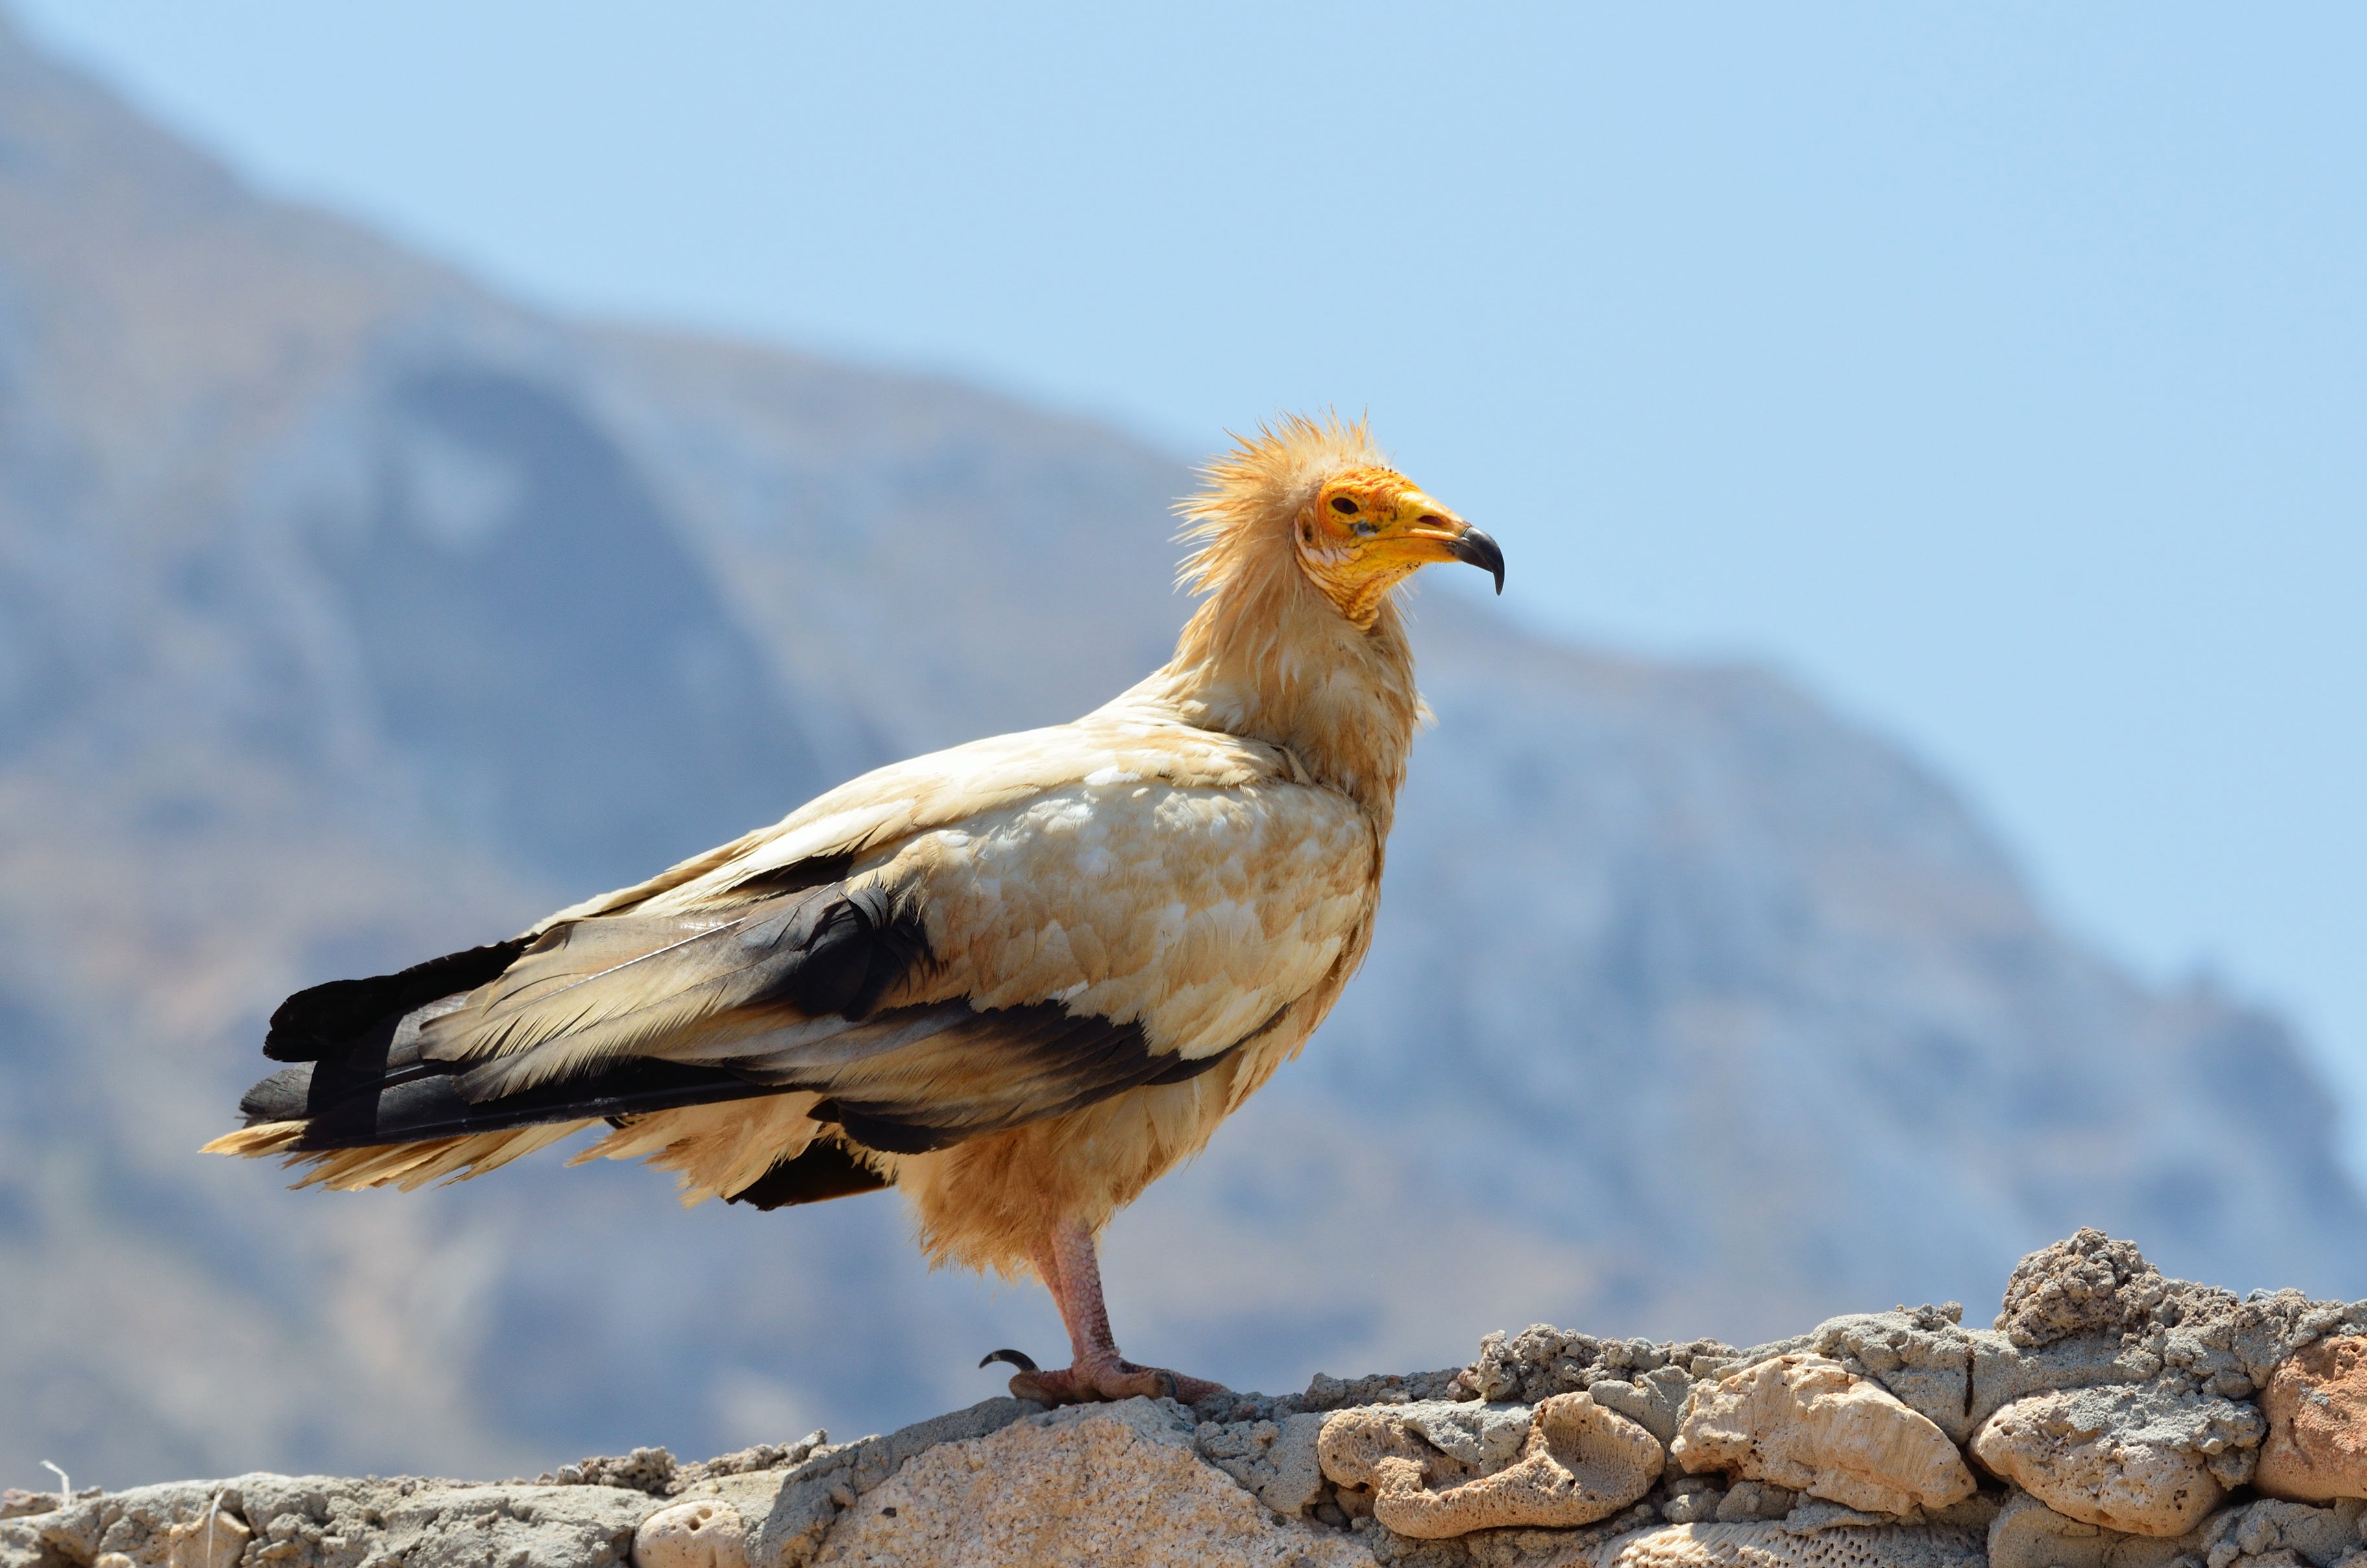 Critically-endangered Egyptian vultures are among species threatened by the development of the city